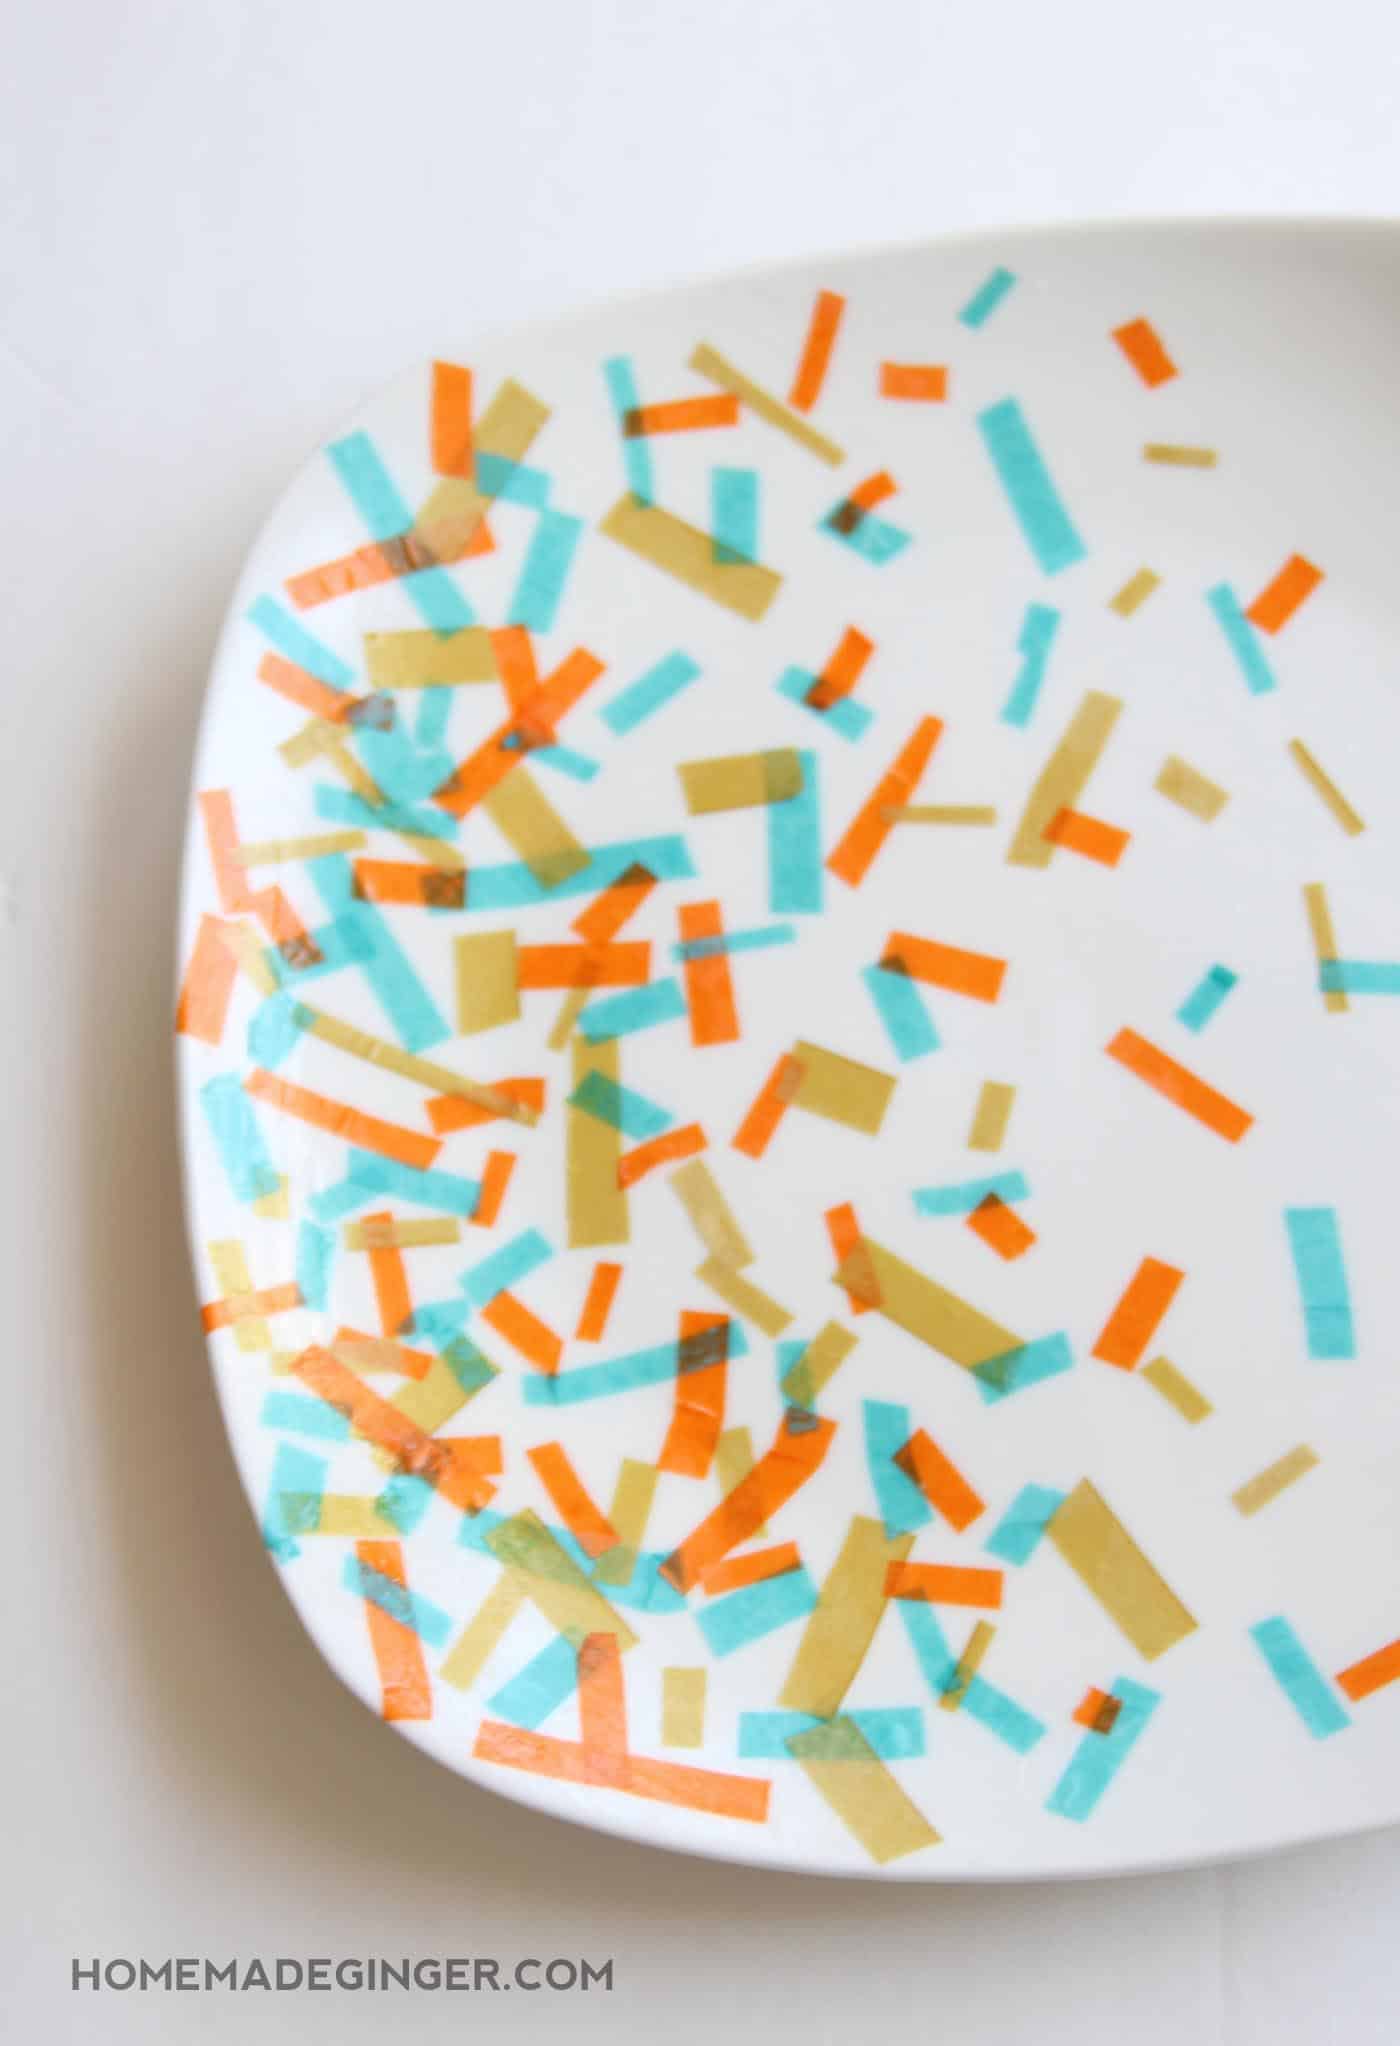 DIY confetti plate made with tissue paper and Mod Podge